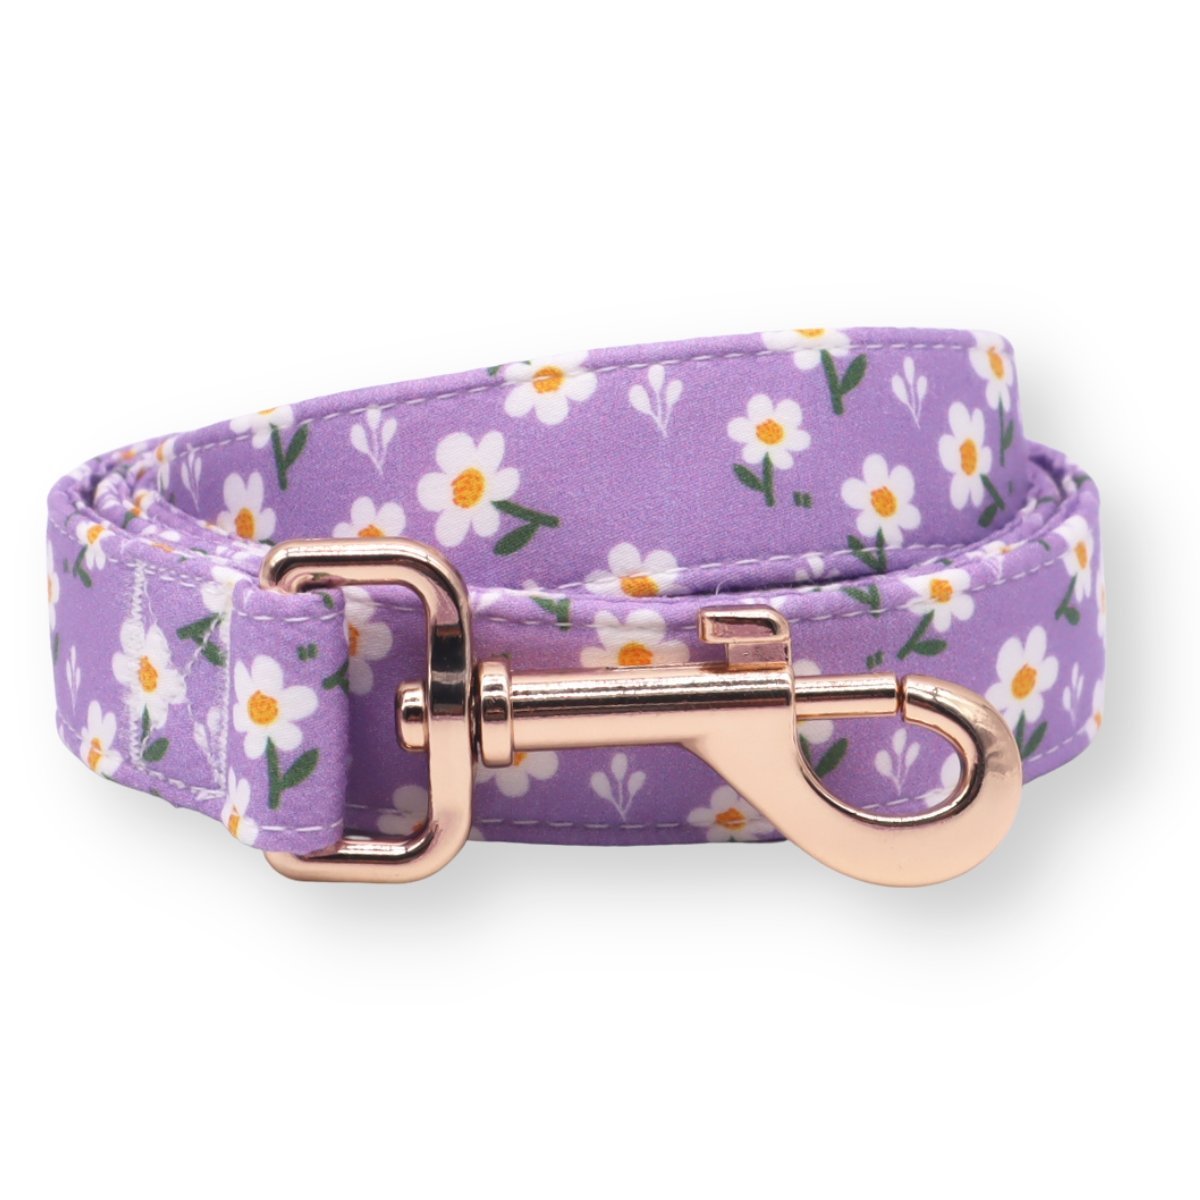 Daisy pattern leashes for dogs - Floral leashes for puppy 